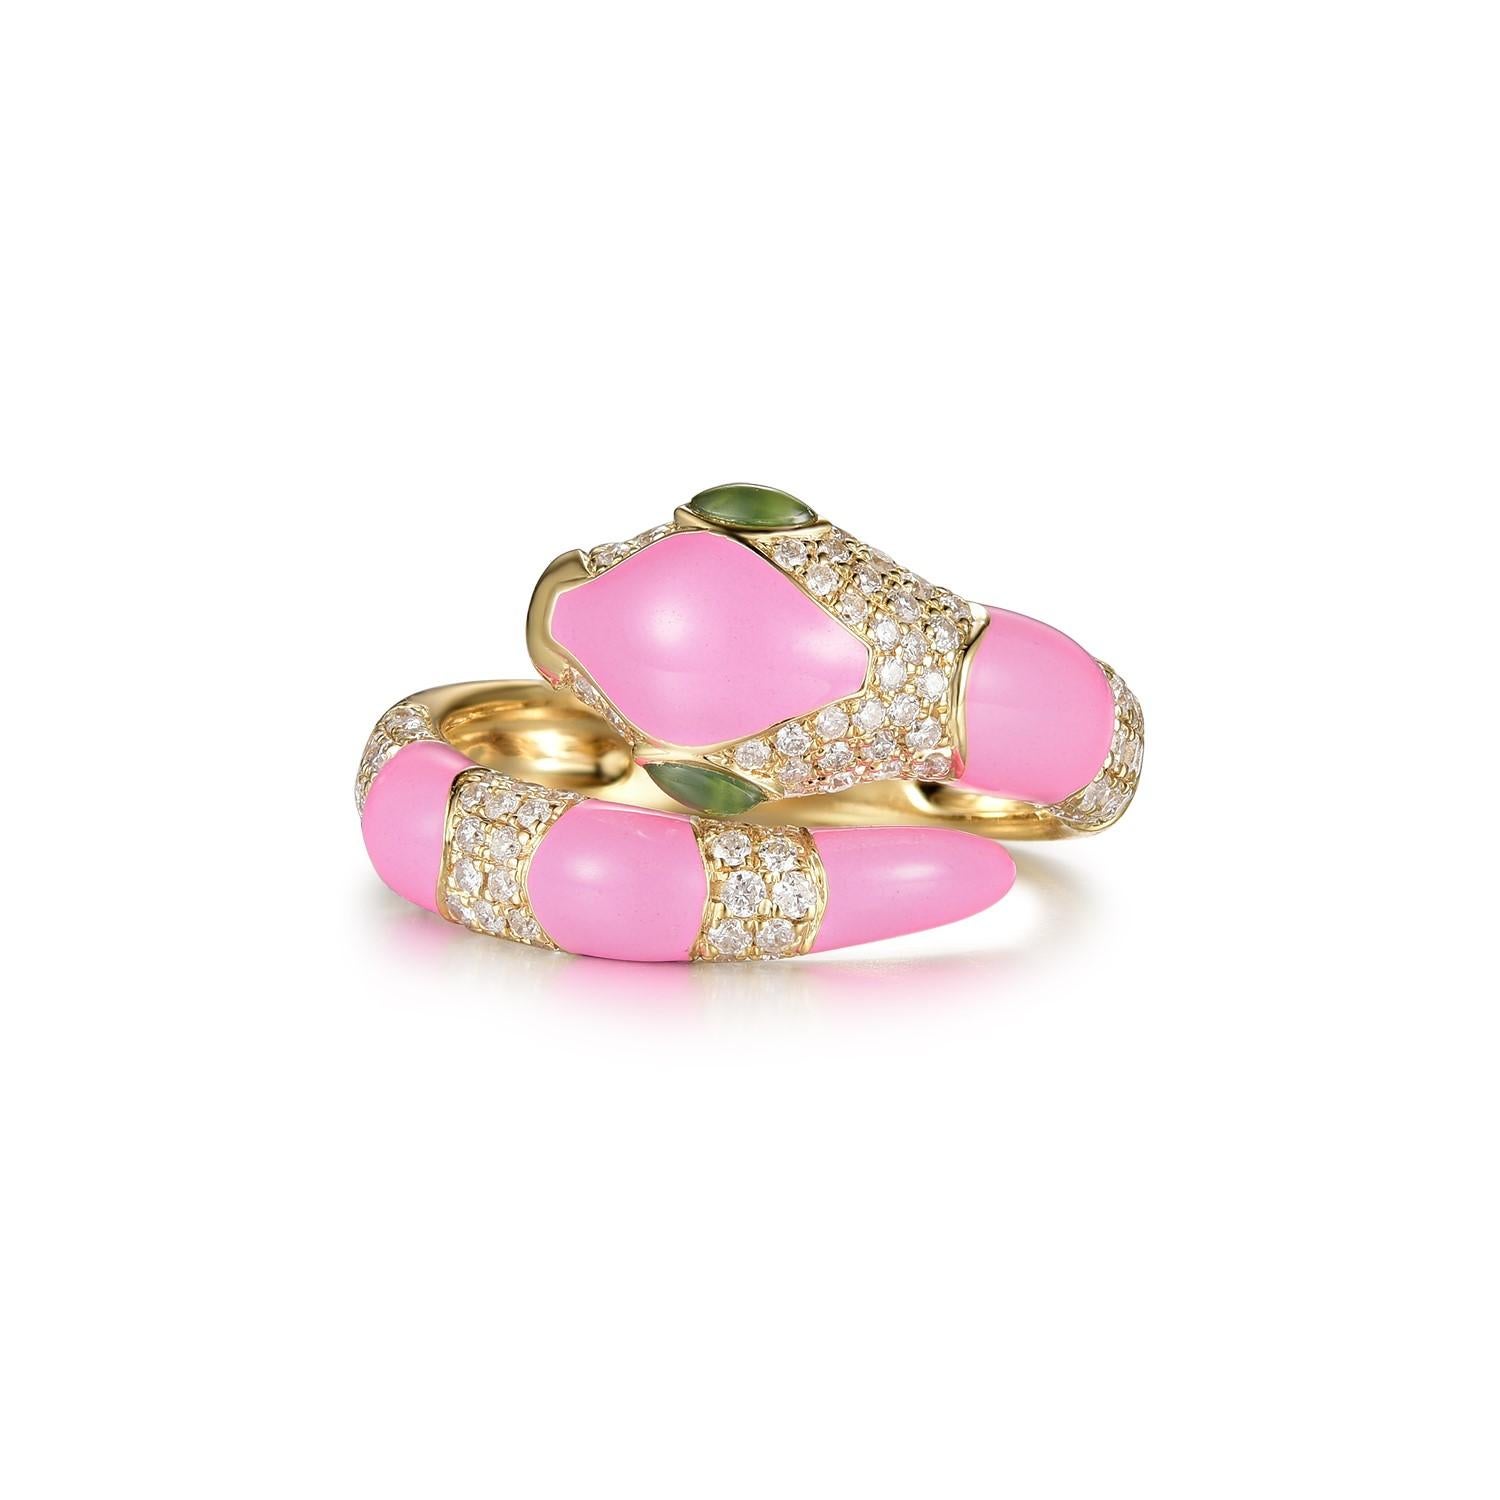 This stunning snake ring features 0.75 carat of white round diamonds, the body is covered with pink enamel. The eyes of the ring is set with green jade. The snake can be customized in any color or stones. The ring is made with 18 karat yellow gold.